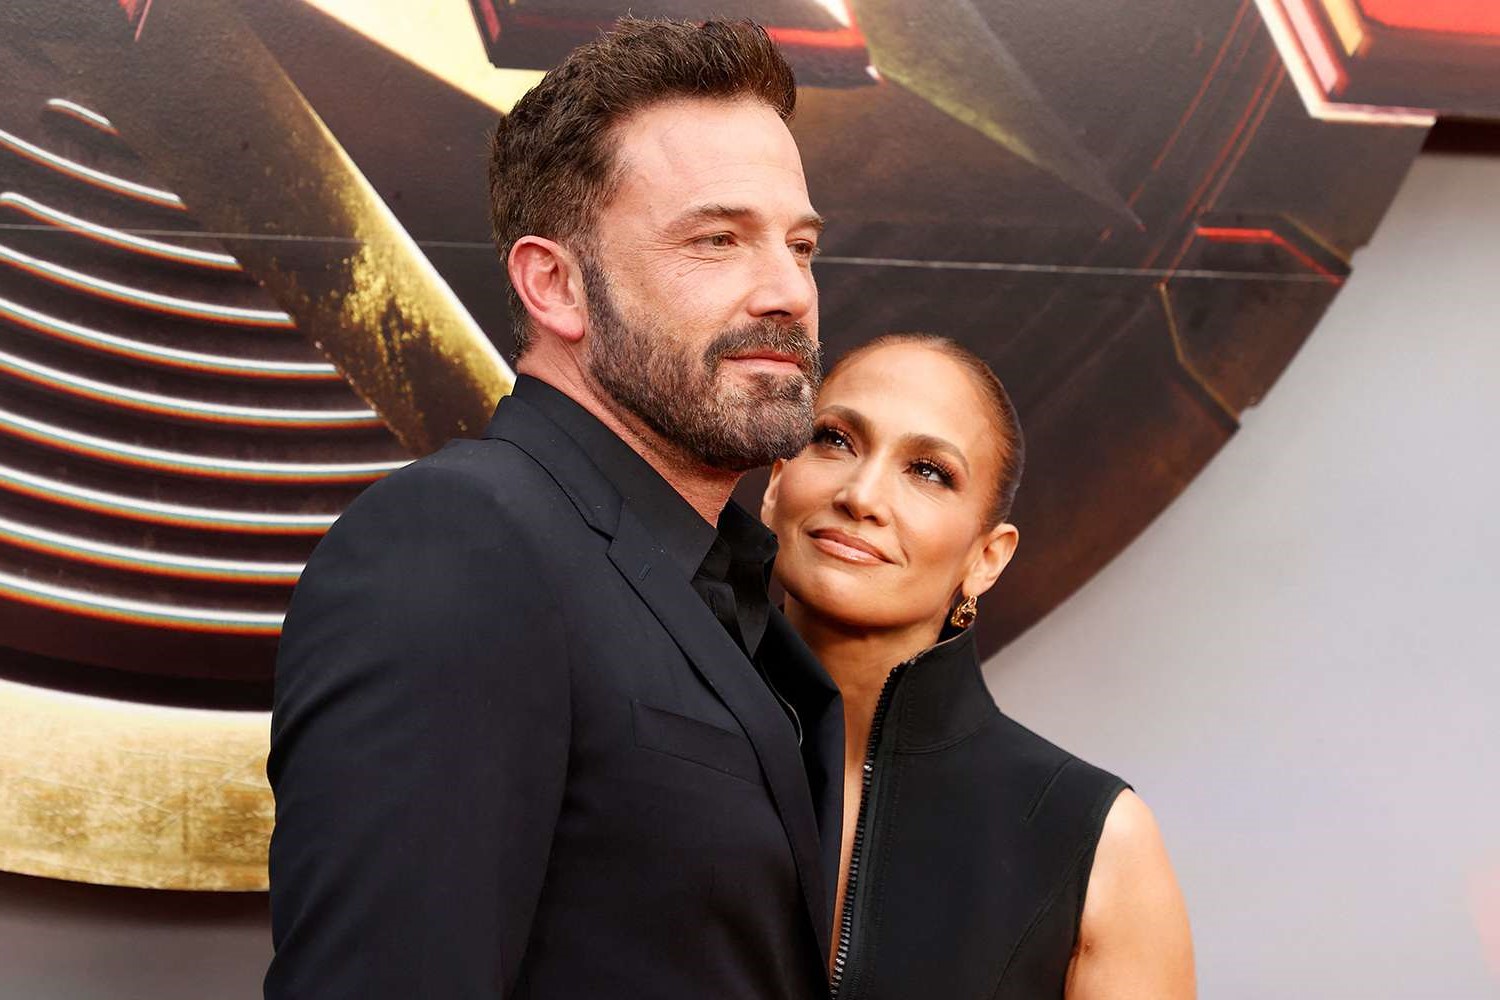 Jennifer Lopez And Ben Affleck Demonstrate Good Manners After Watching 'Dune 2' In Theater